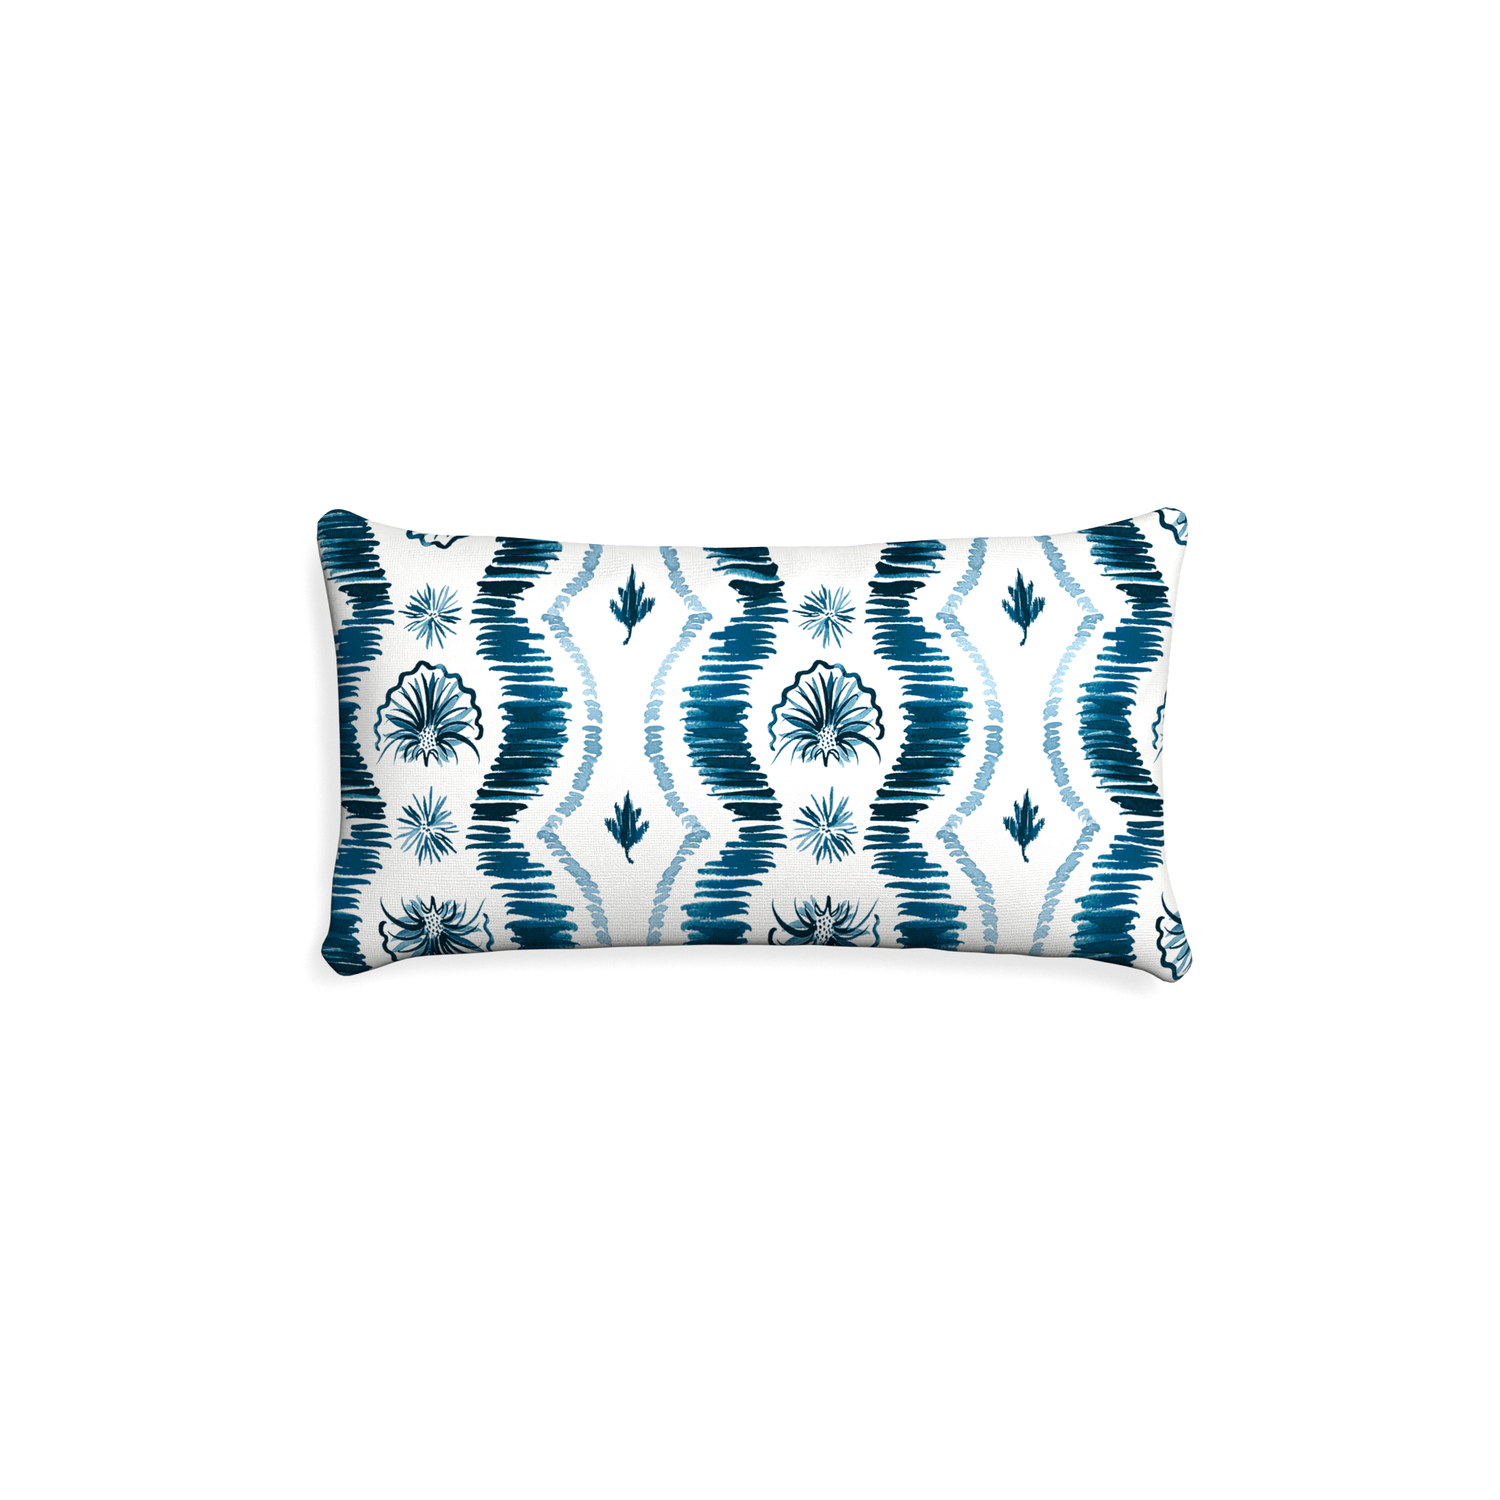 Petite-lumbar alice custom blue ikatpillow with none on white background